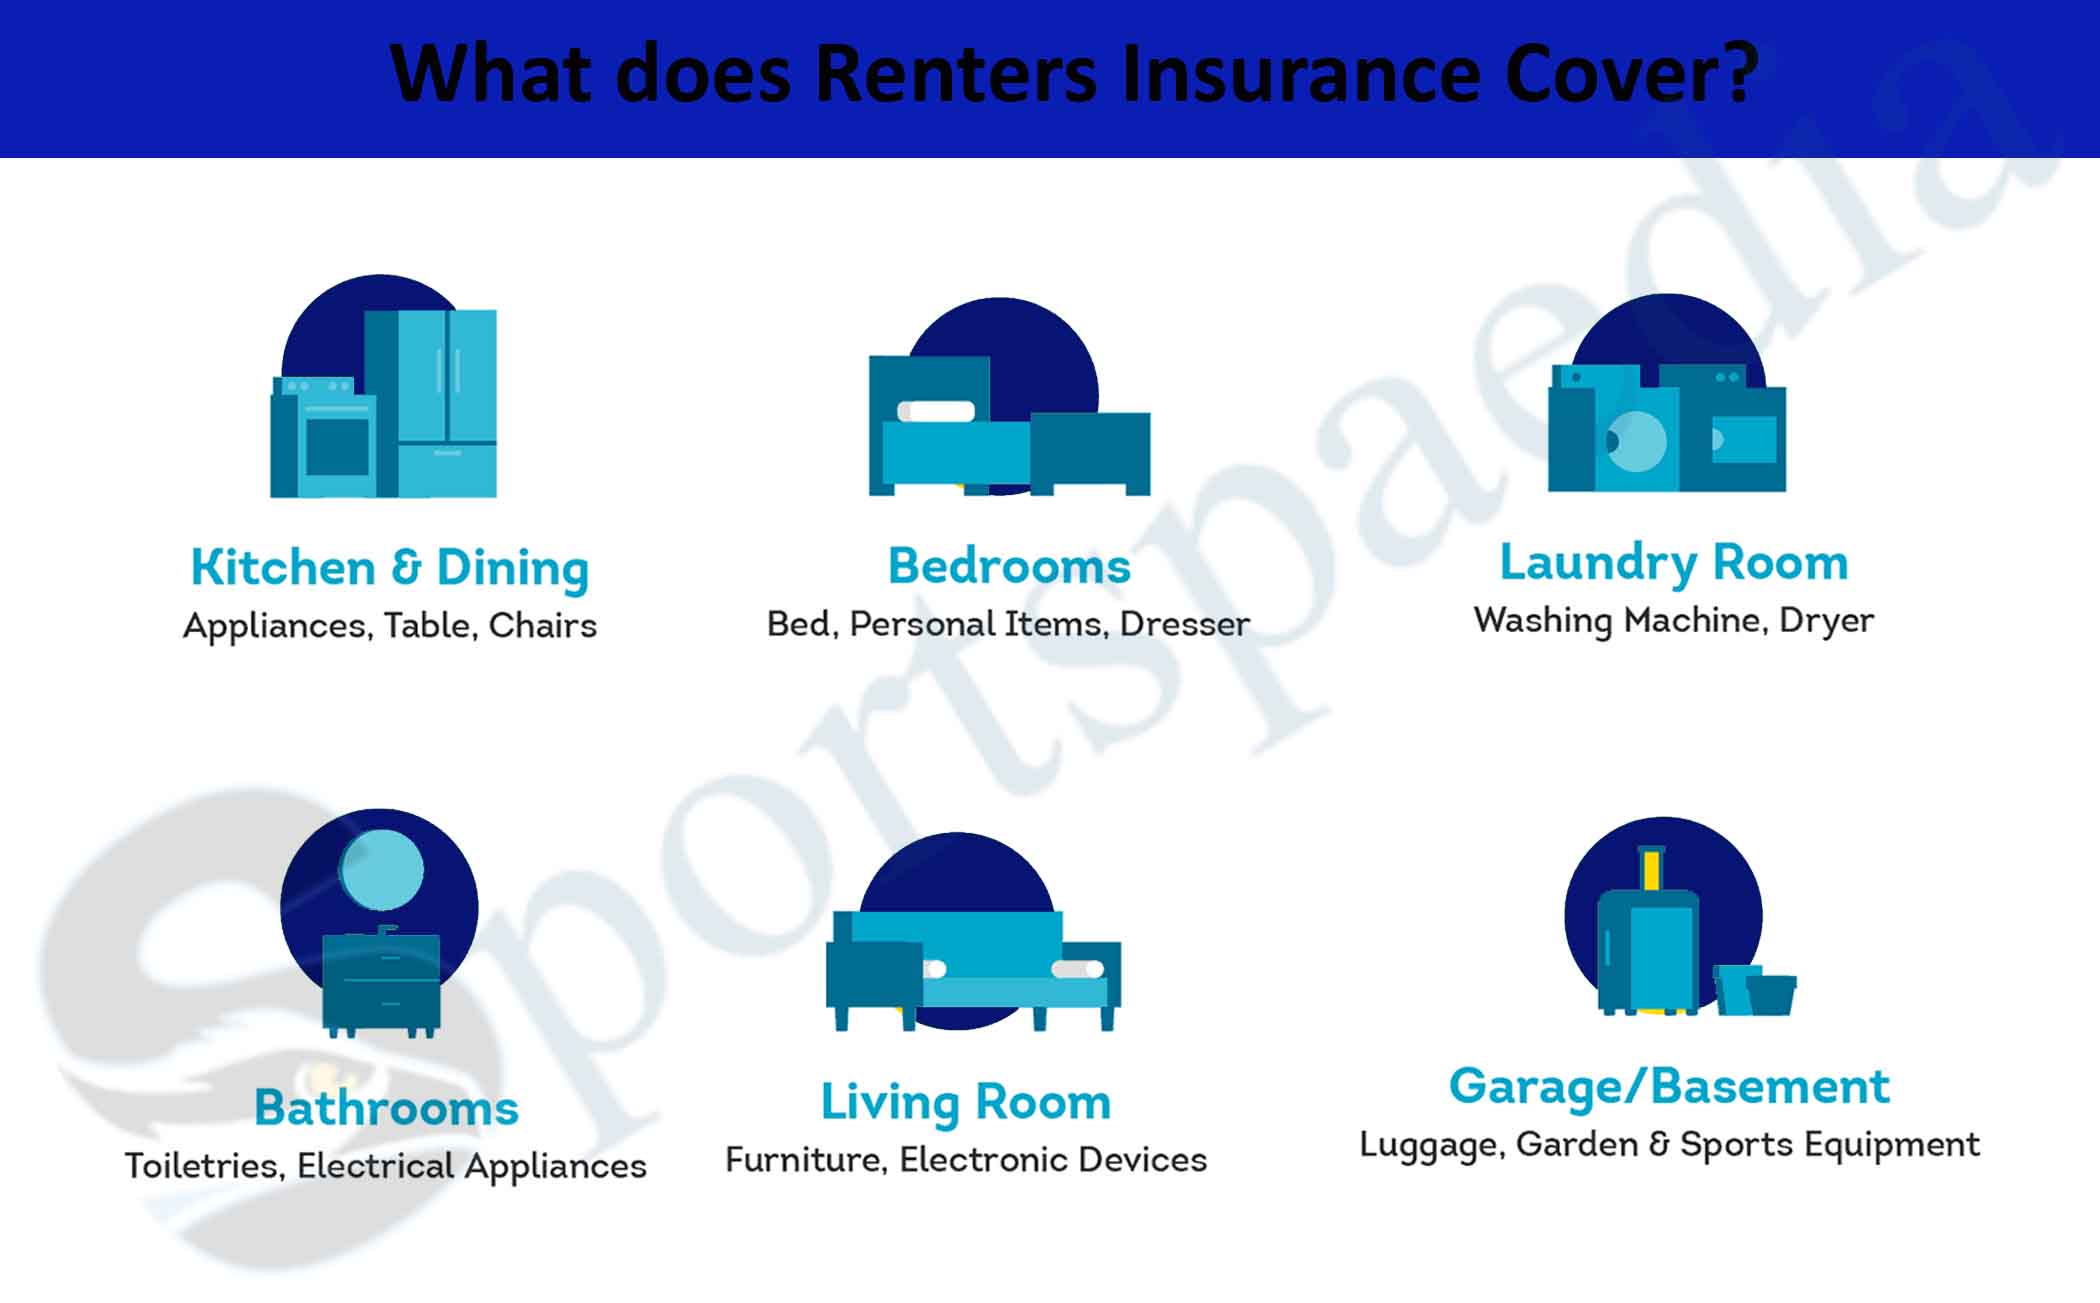 What does Renters Insurance Cover?